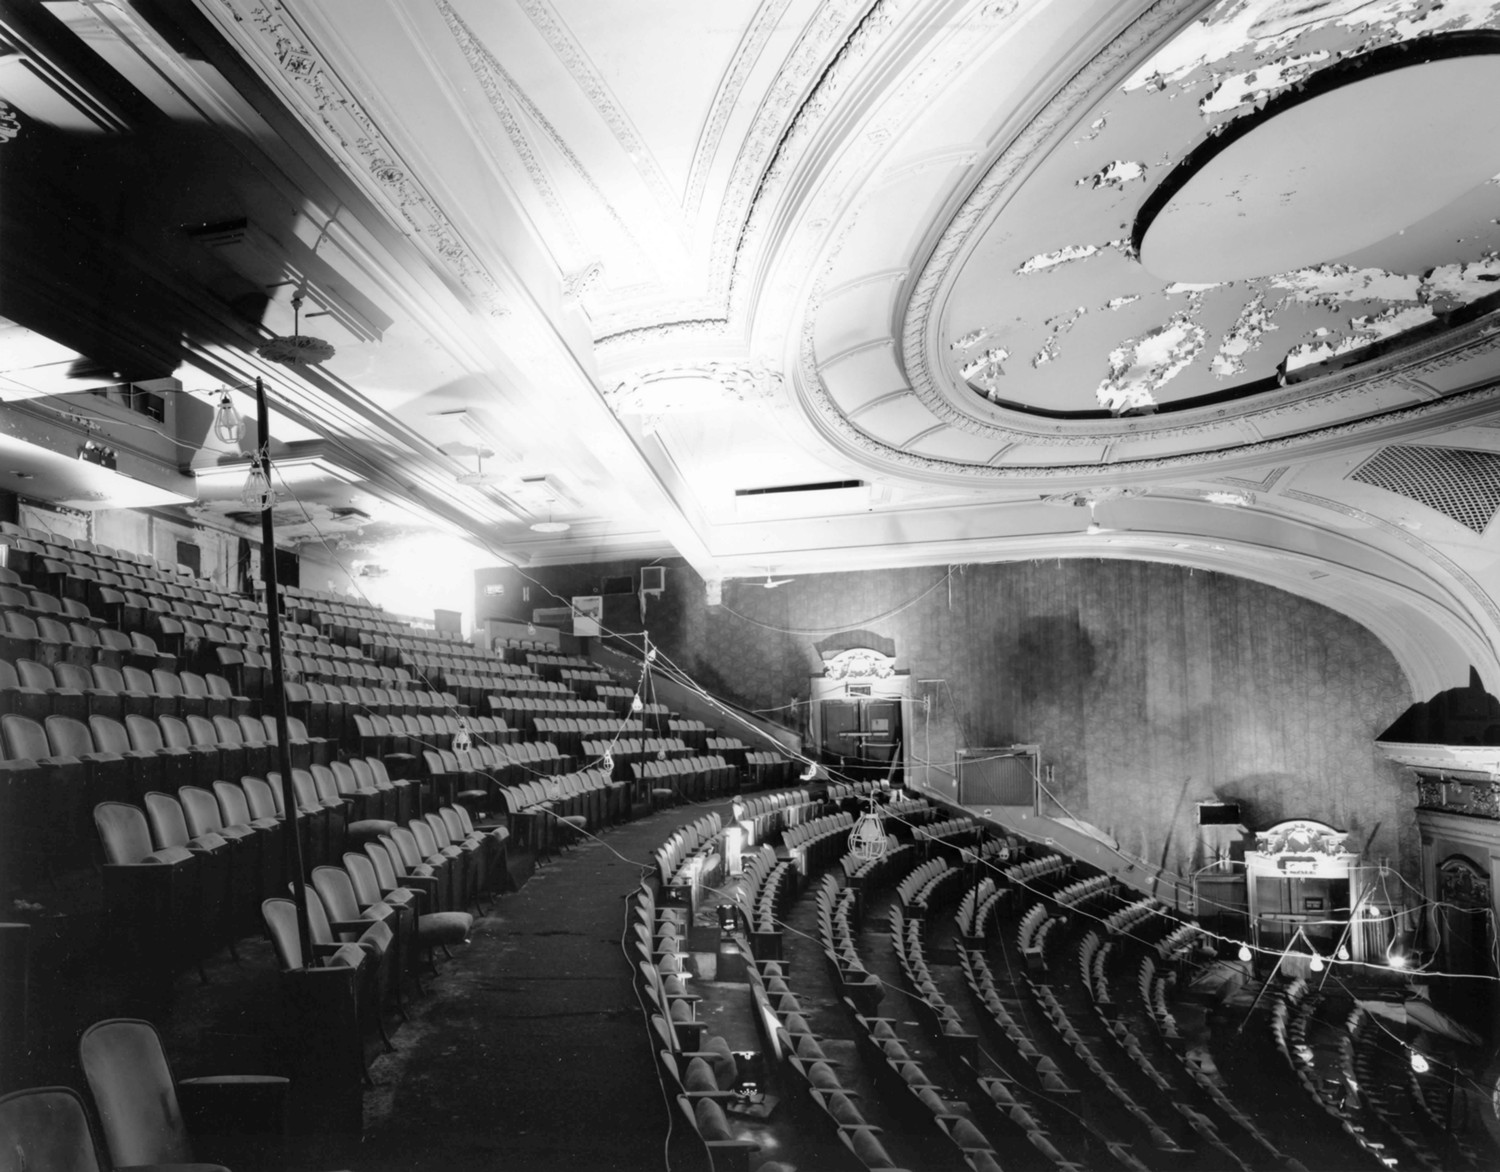 Hippodrome Theatre, Baltimore Maryland Balcony level looking west (1998)